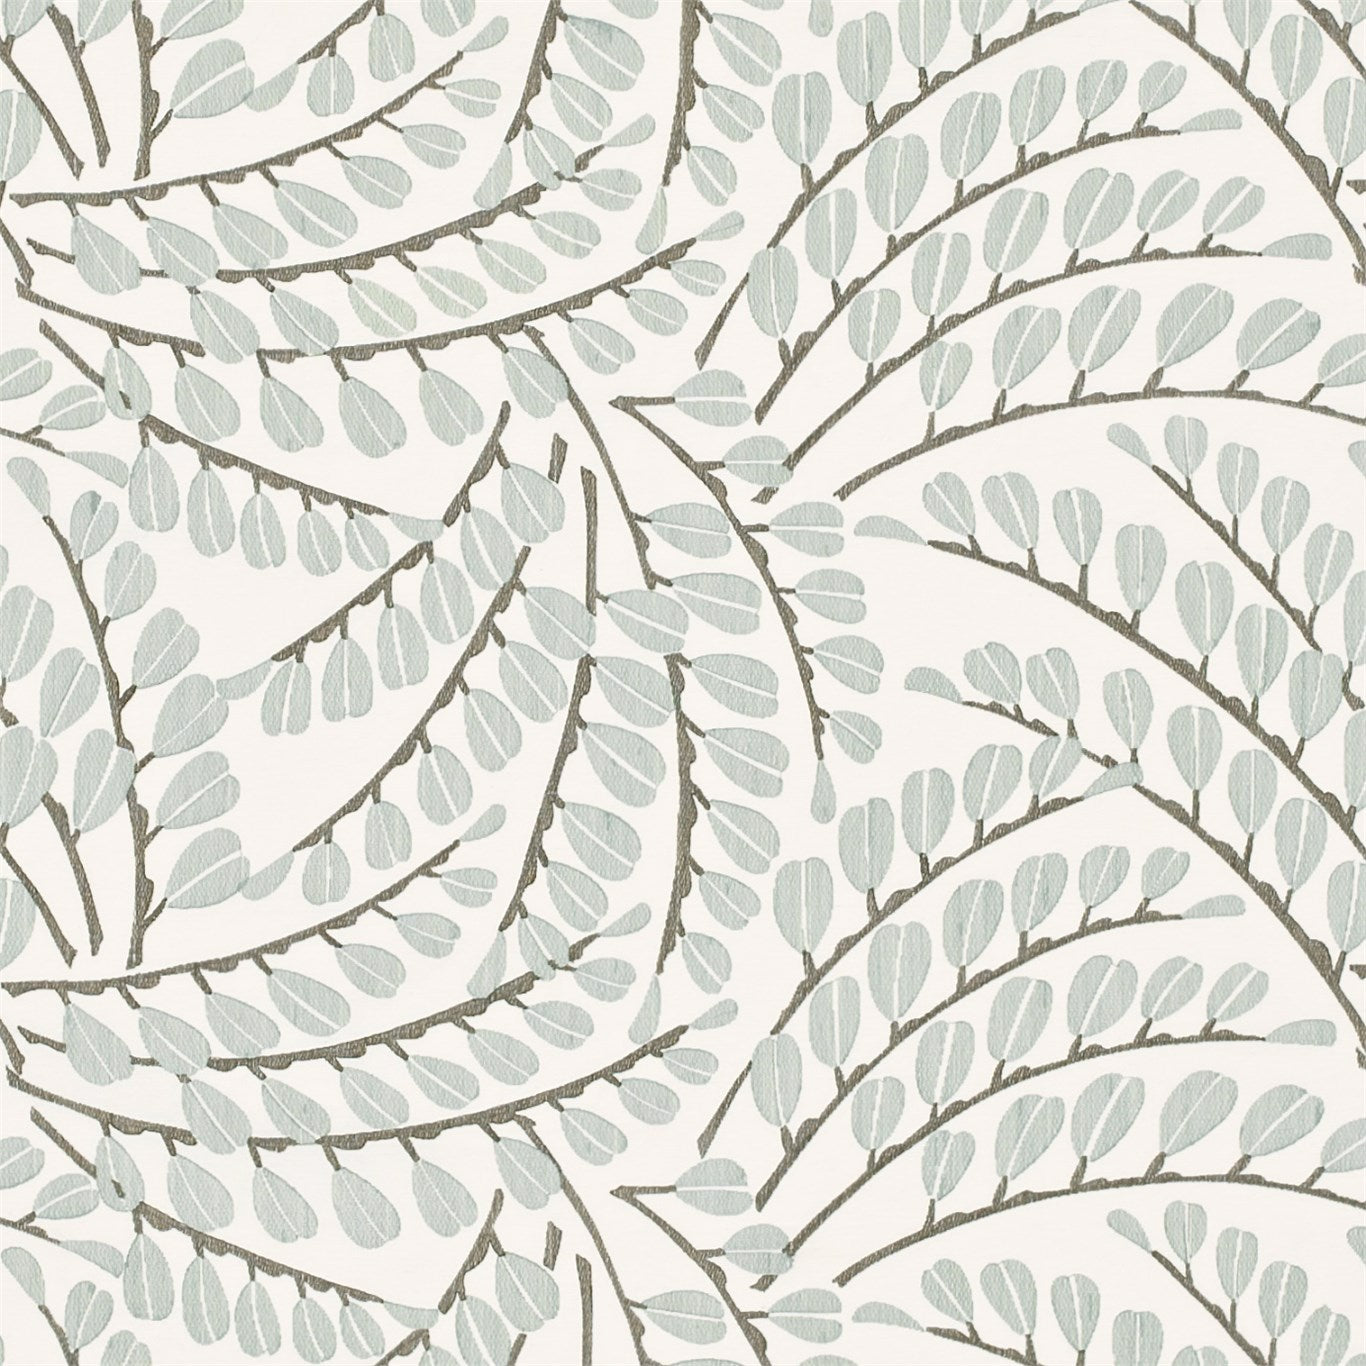 Anais Fabric by Harlequin - HPOF130890 - Powder Blue/Pewter